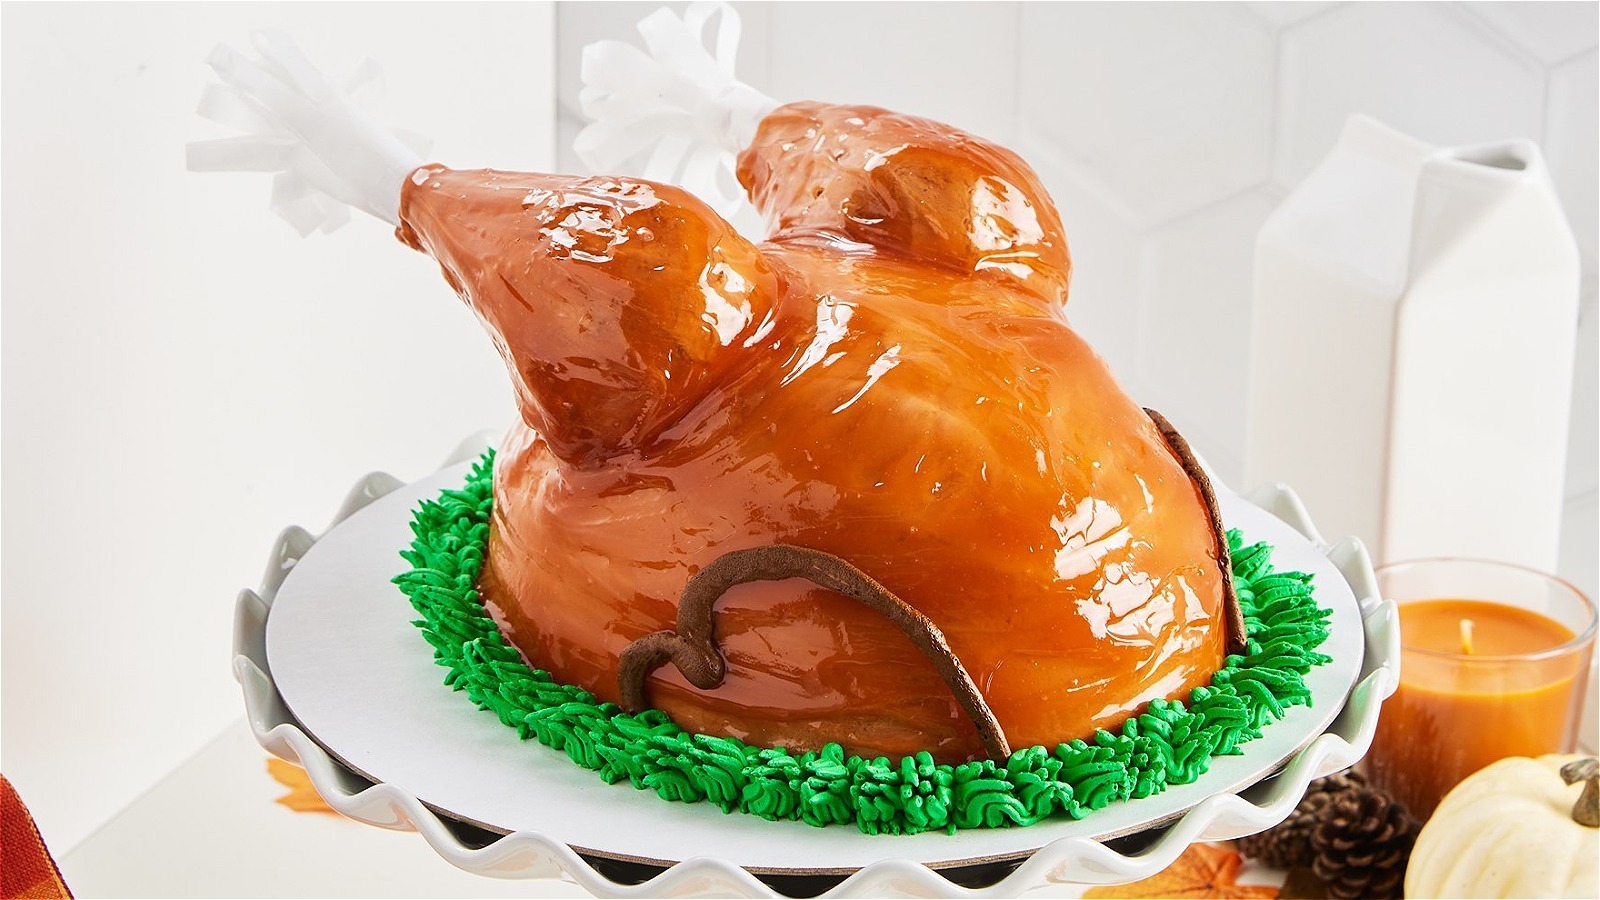 Discover the Delightful Baskin Robbins Turkey Cake: A Festive Treat for All Occasions